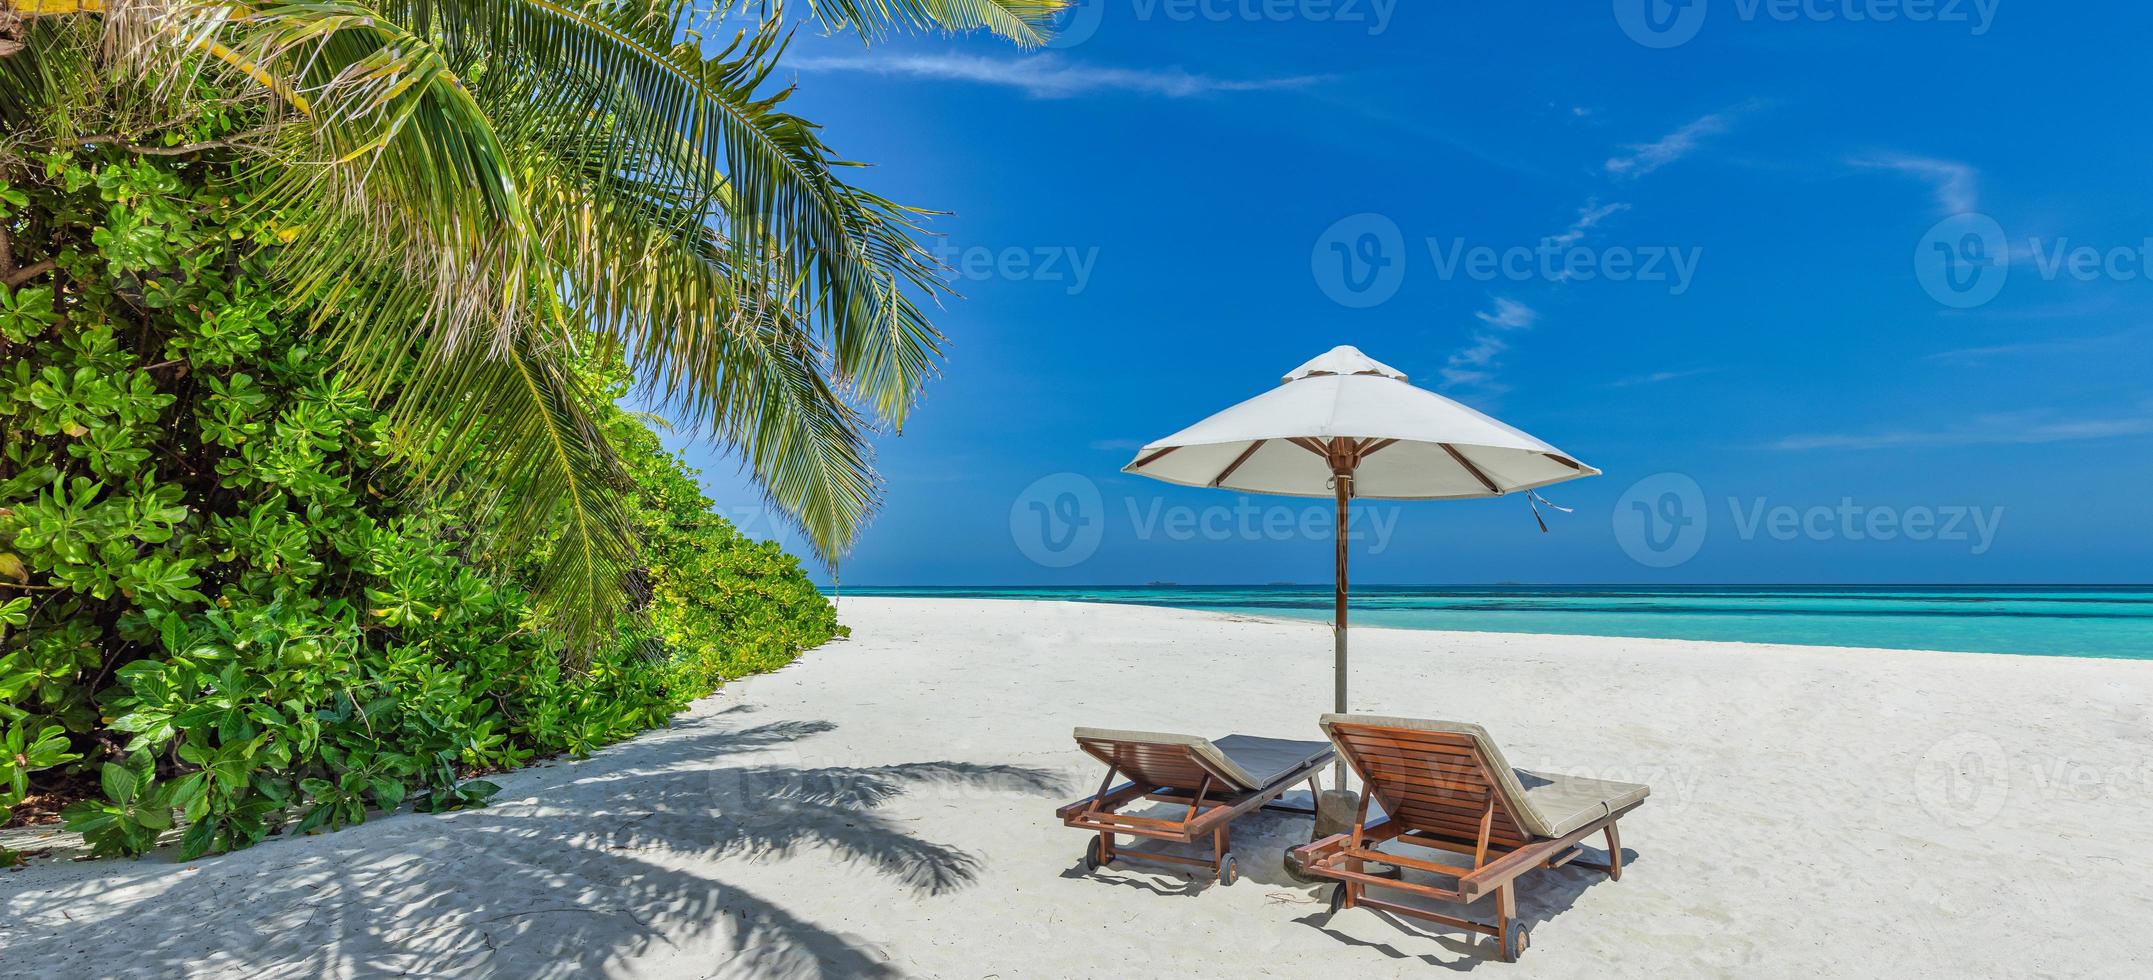 Beautiful tropical sunny shore, couple sun beds chairs umbrella under palm tree leaves. Sea sand sky. Romantic relax lifestyle panoramic island beach background. Summer travel exotic vacation panorama photo